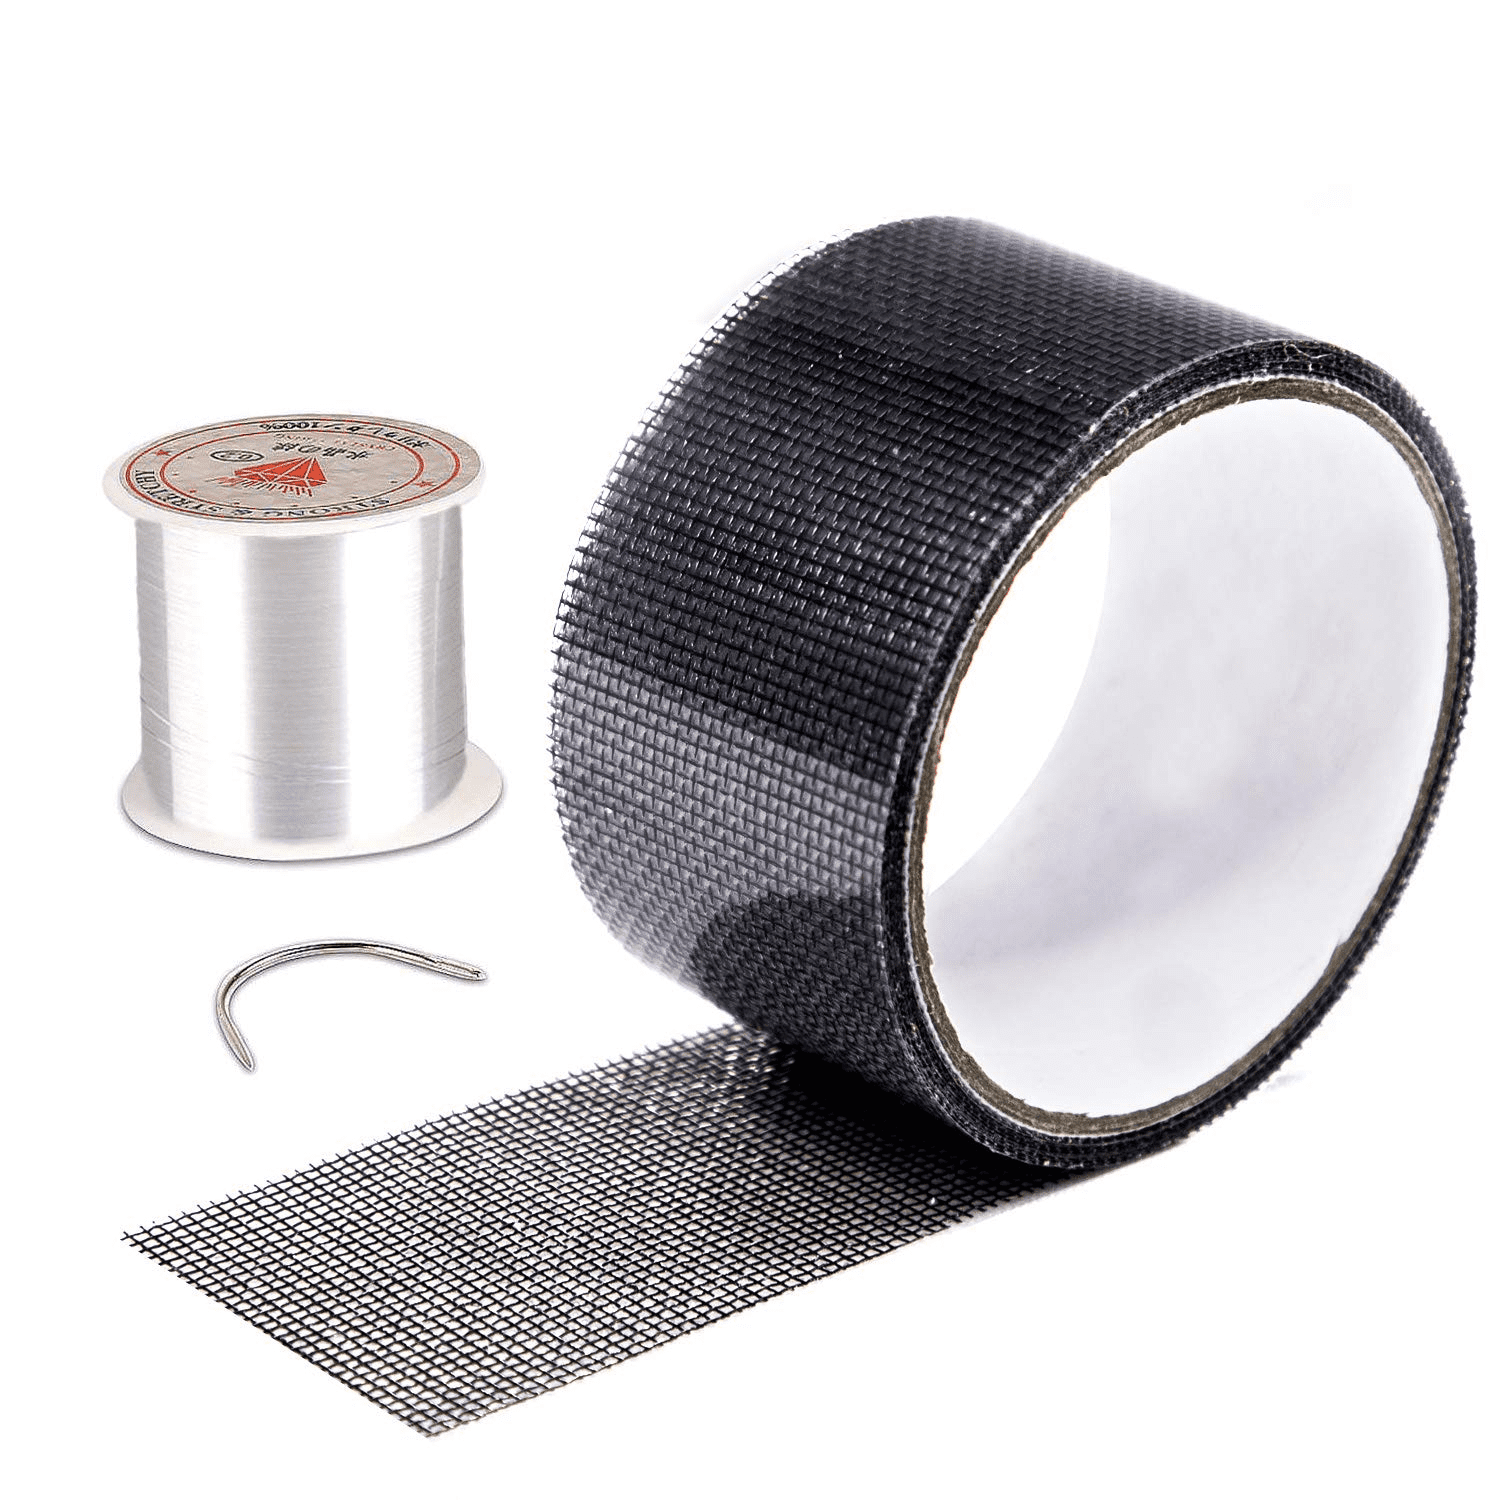 GWHOLE 5 x 200 cm Windows and Door Screen Repair Window Insect Screen Adhesive Tape Fiberglass Cloth Mesh Tape with Waterproof Adhesive Seal for Repair Patch Holes Tears Prevent Mosquitoes Insects